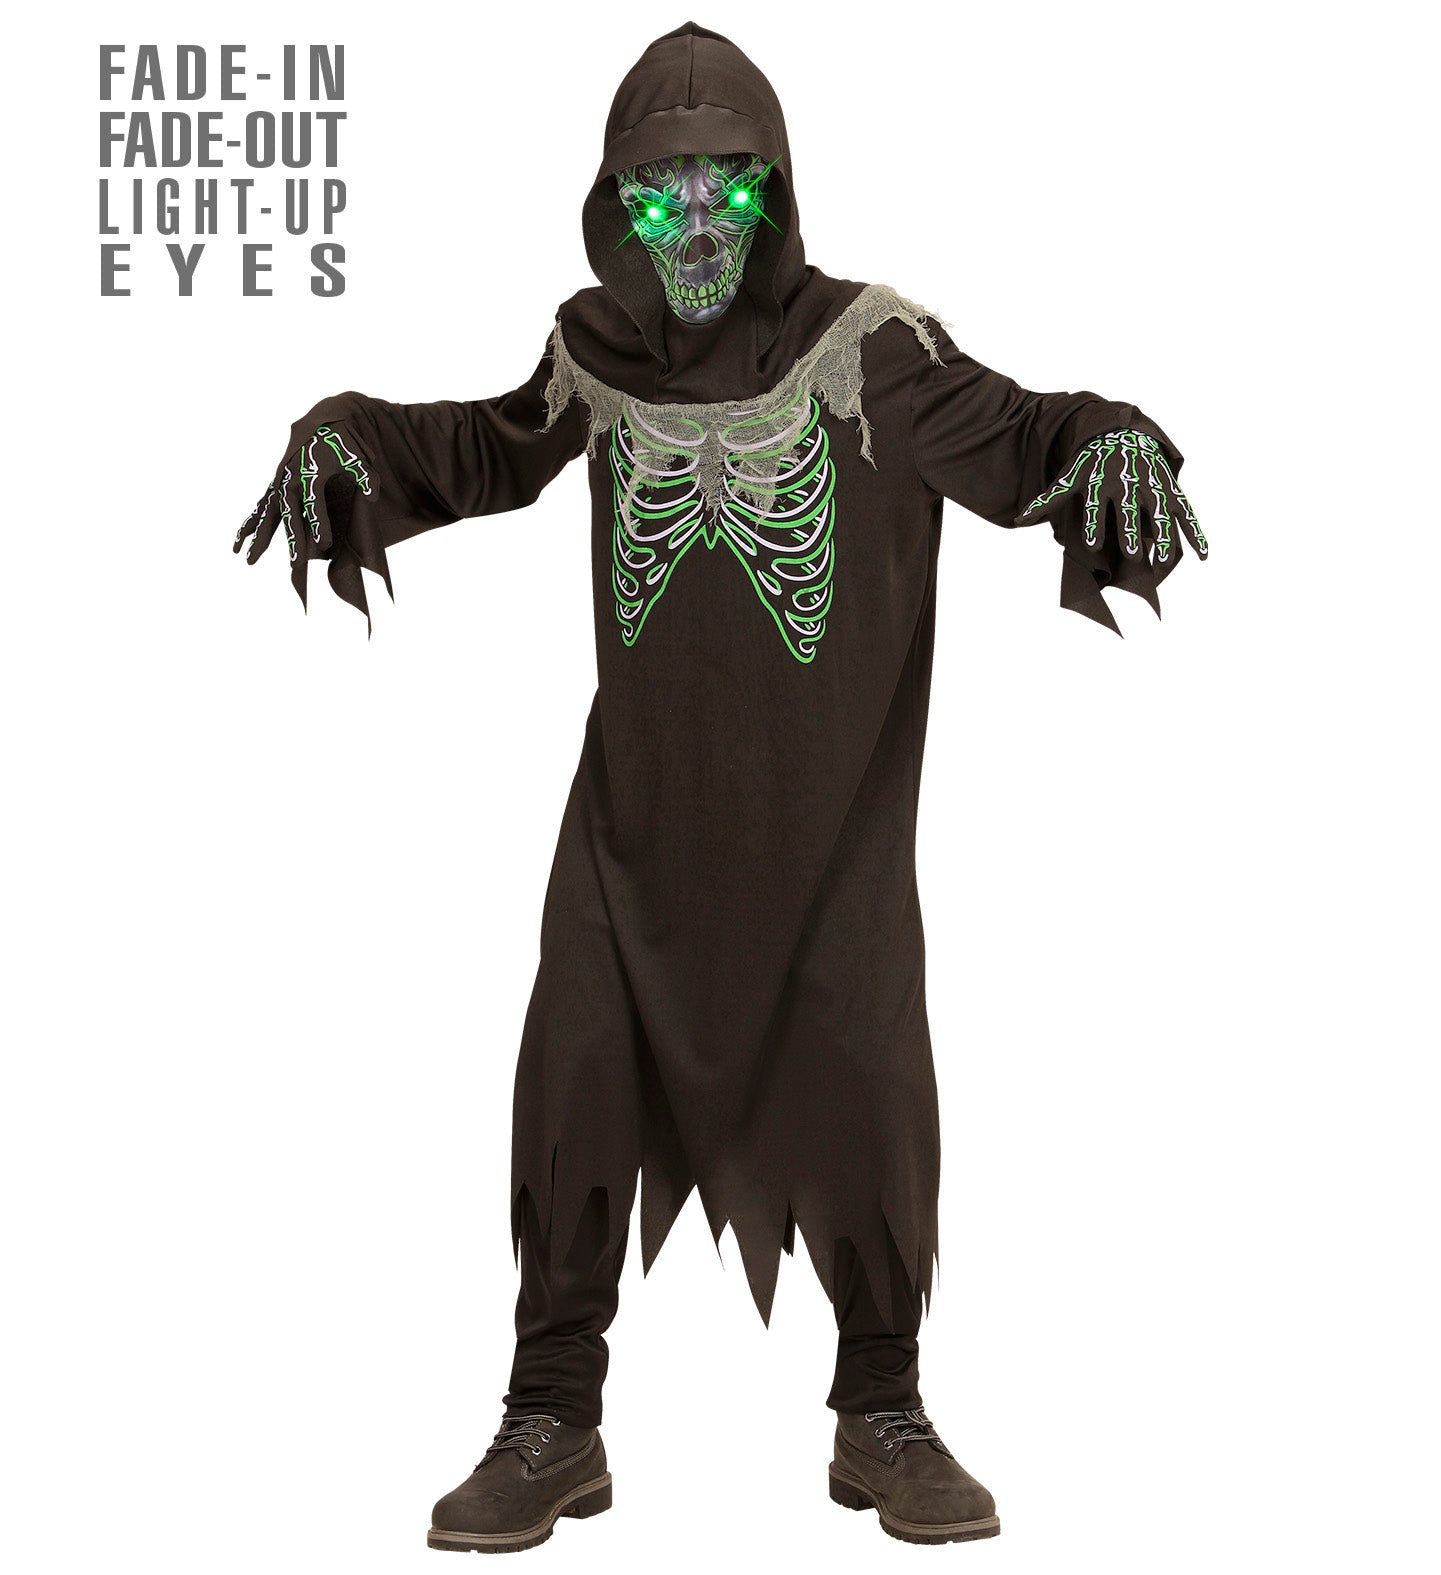 Grim Reaper Light-up Outfit children's